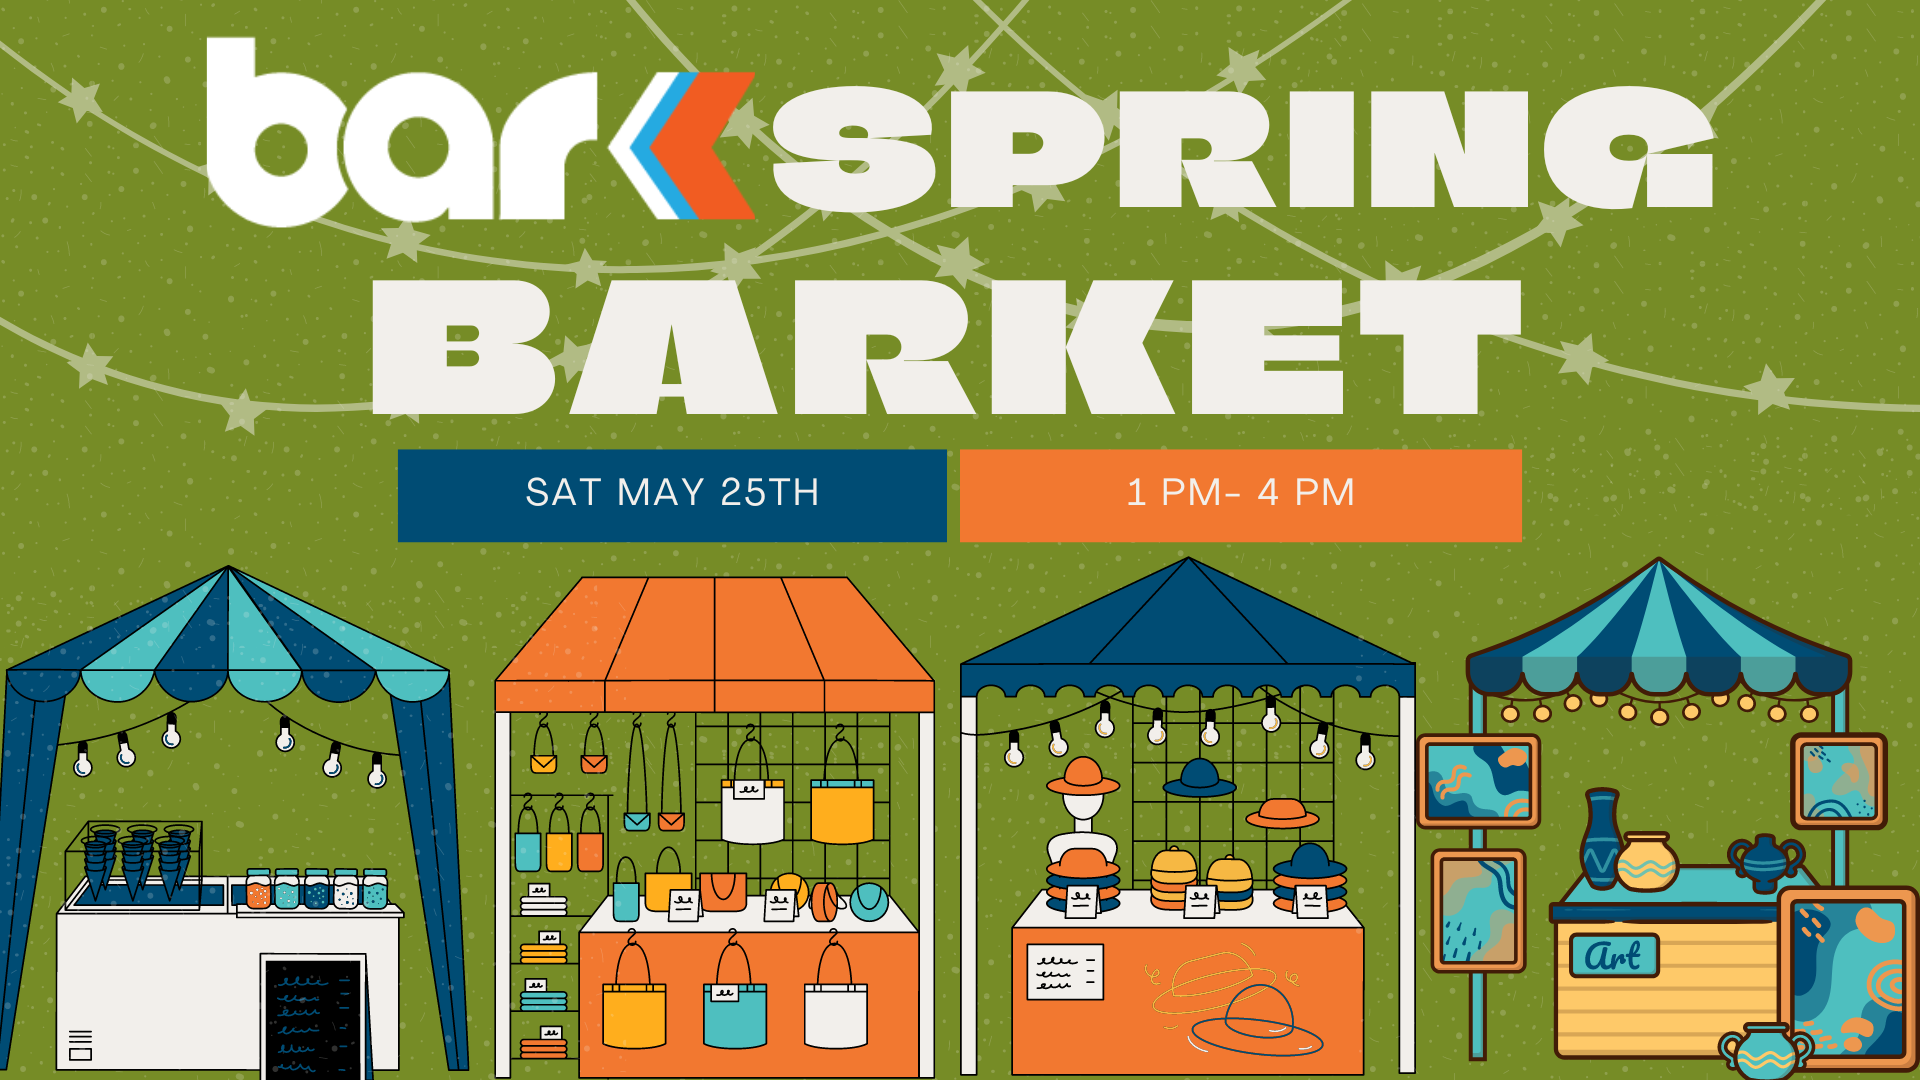 Four artisan stalls with text Bar K Spring Barket Sat May 25th 1pm to 4 pm